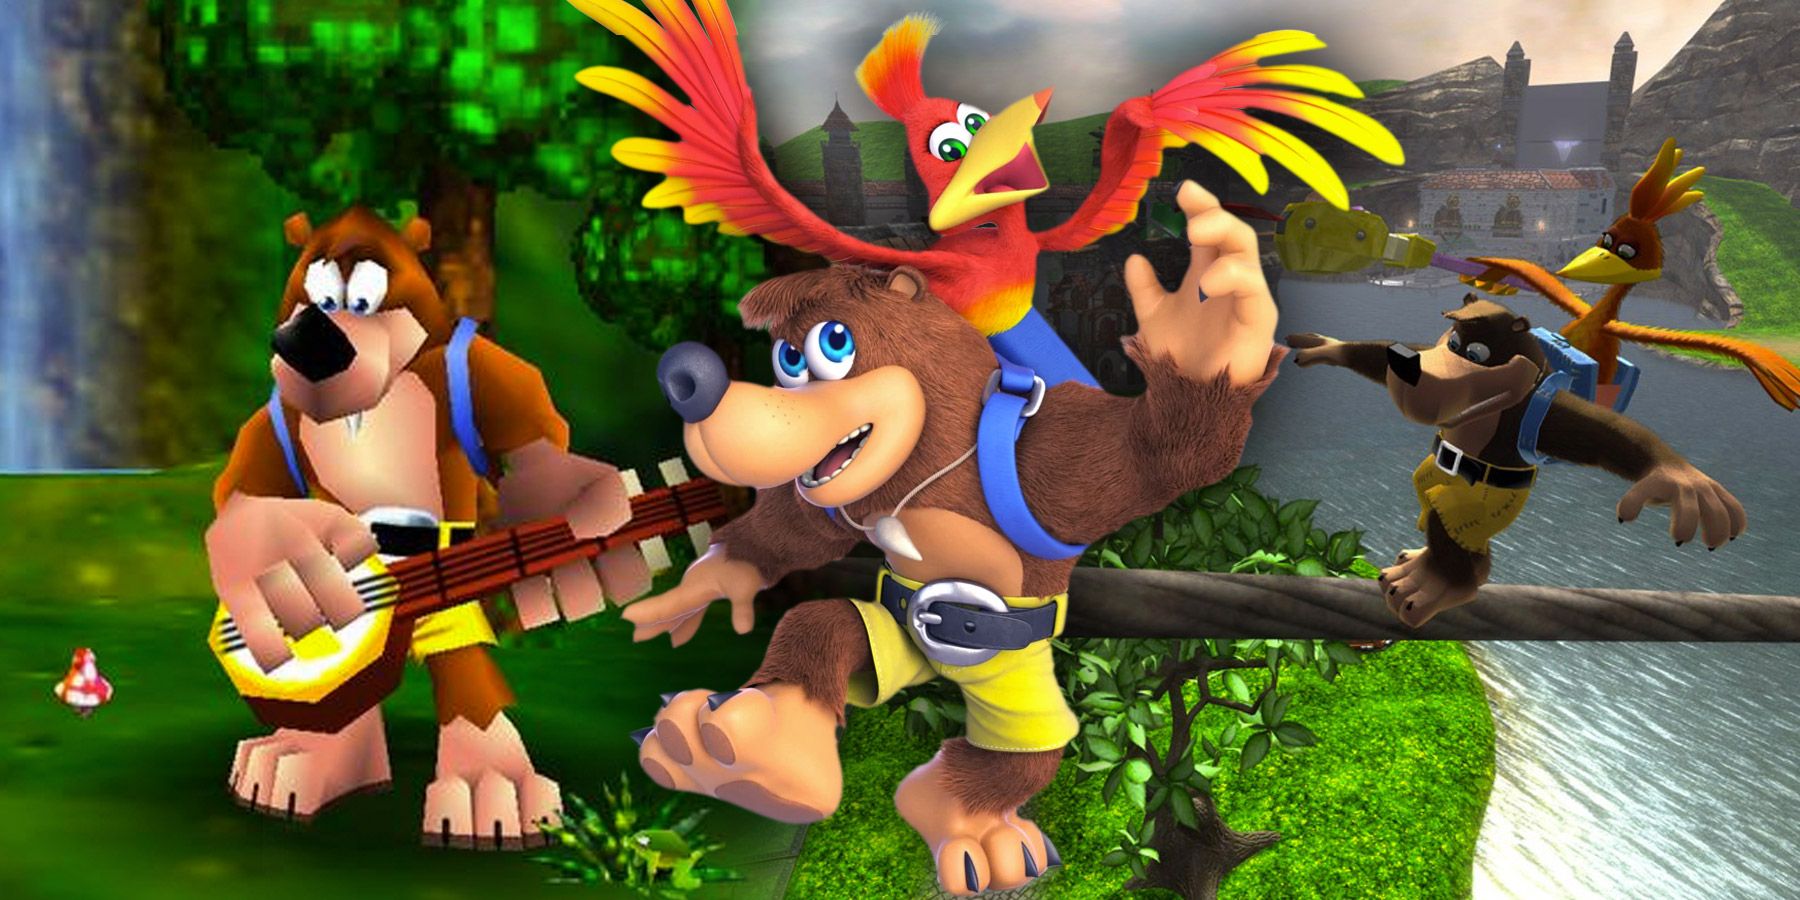 It's Time For a New BanjoKazooie Game